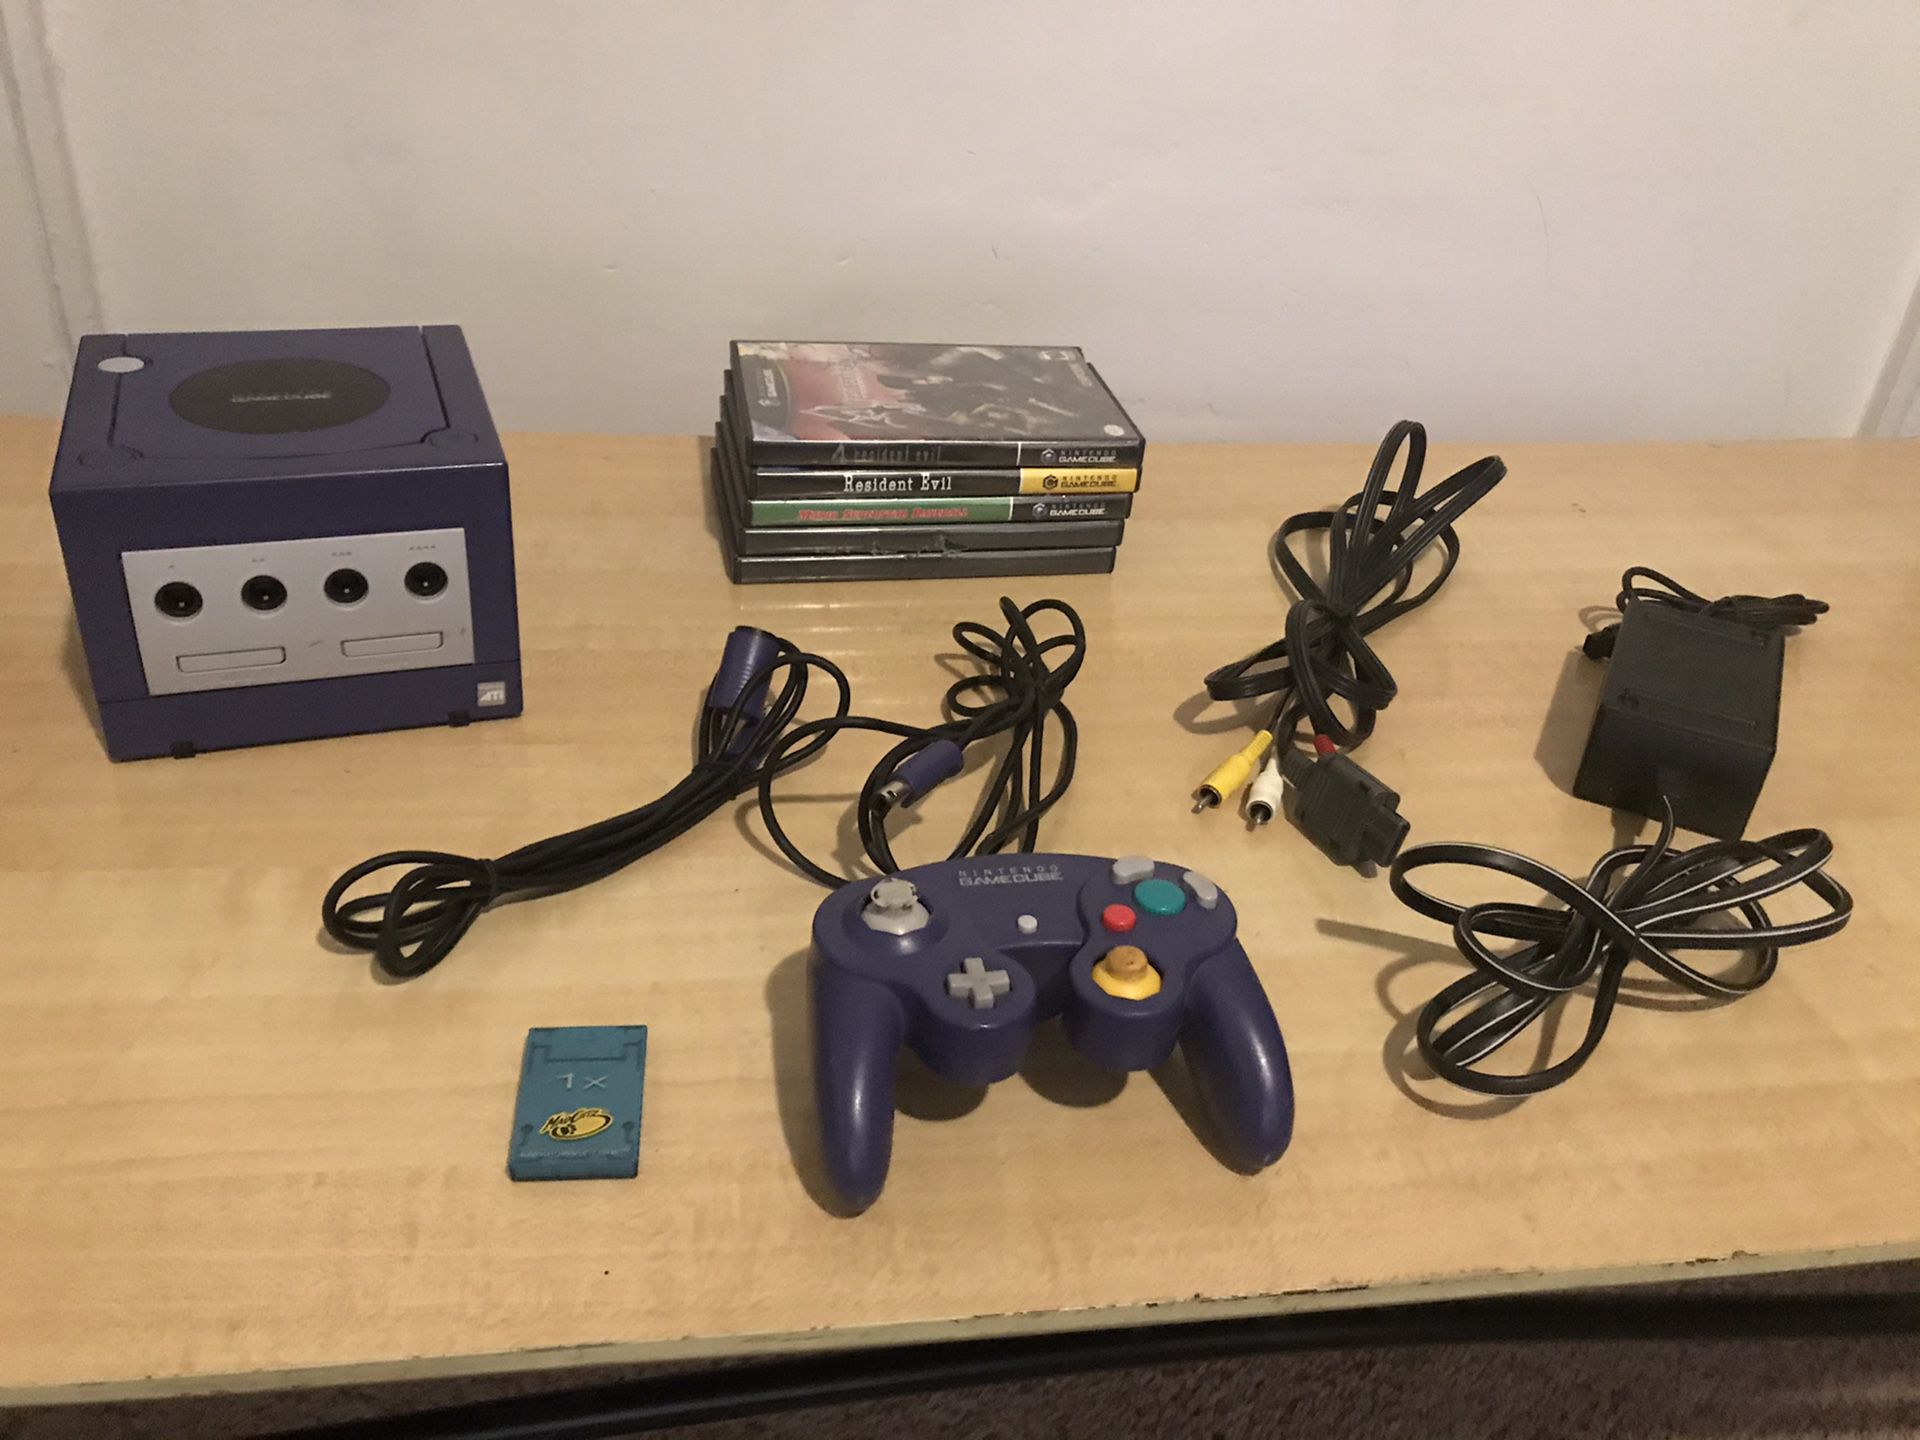 Game Cube with 5 Games - Mario Party 4 & 5, Resident Evil 1 & 4, Mario Baseball